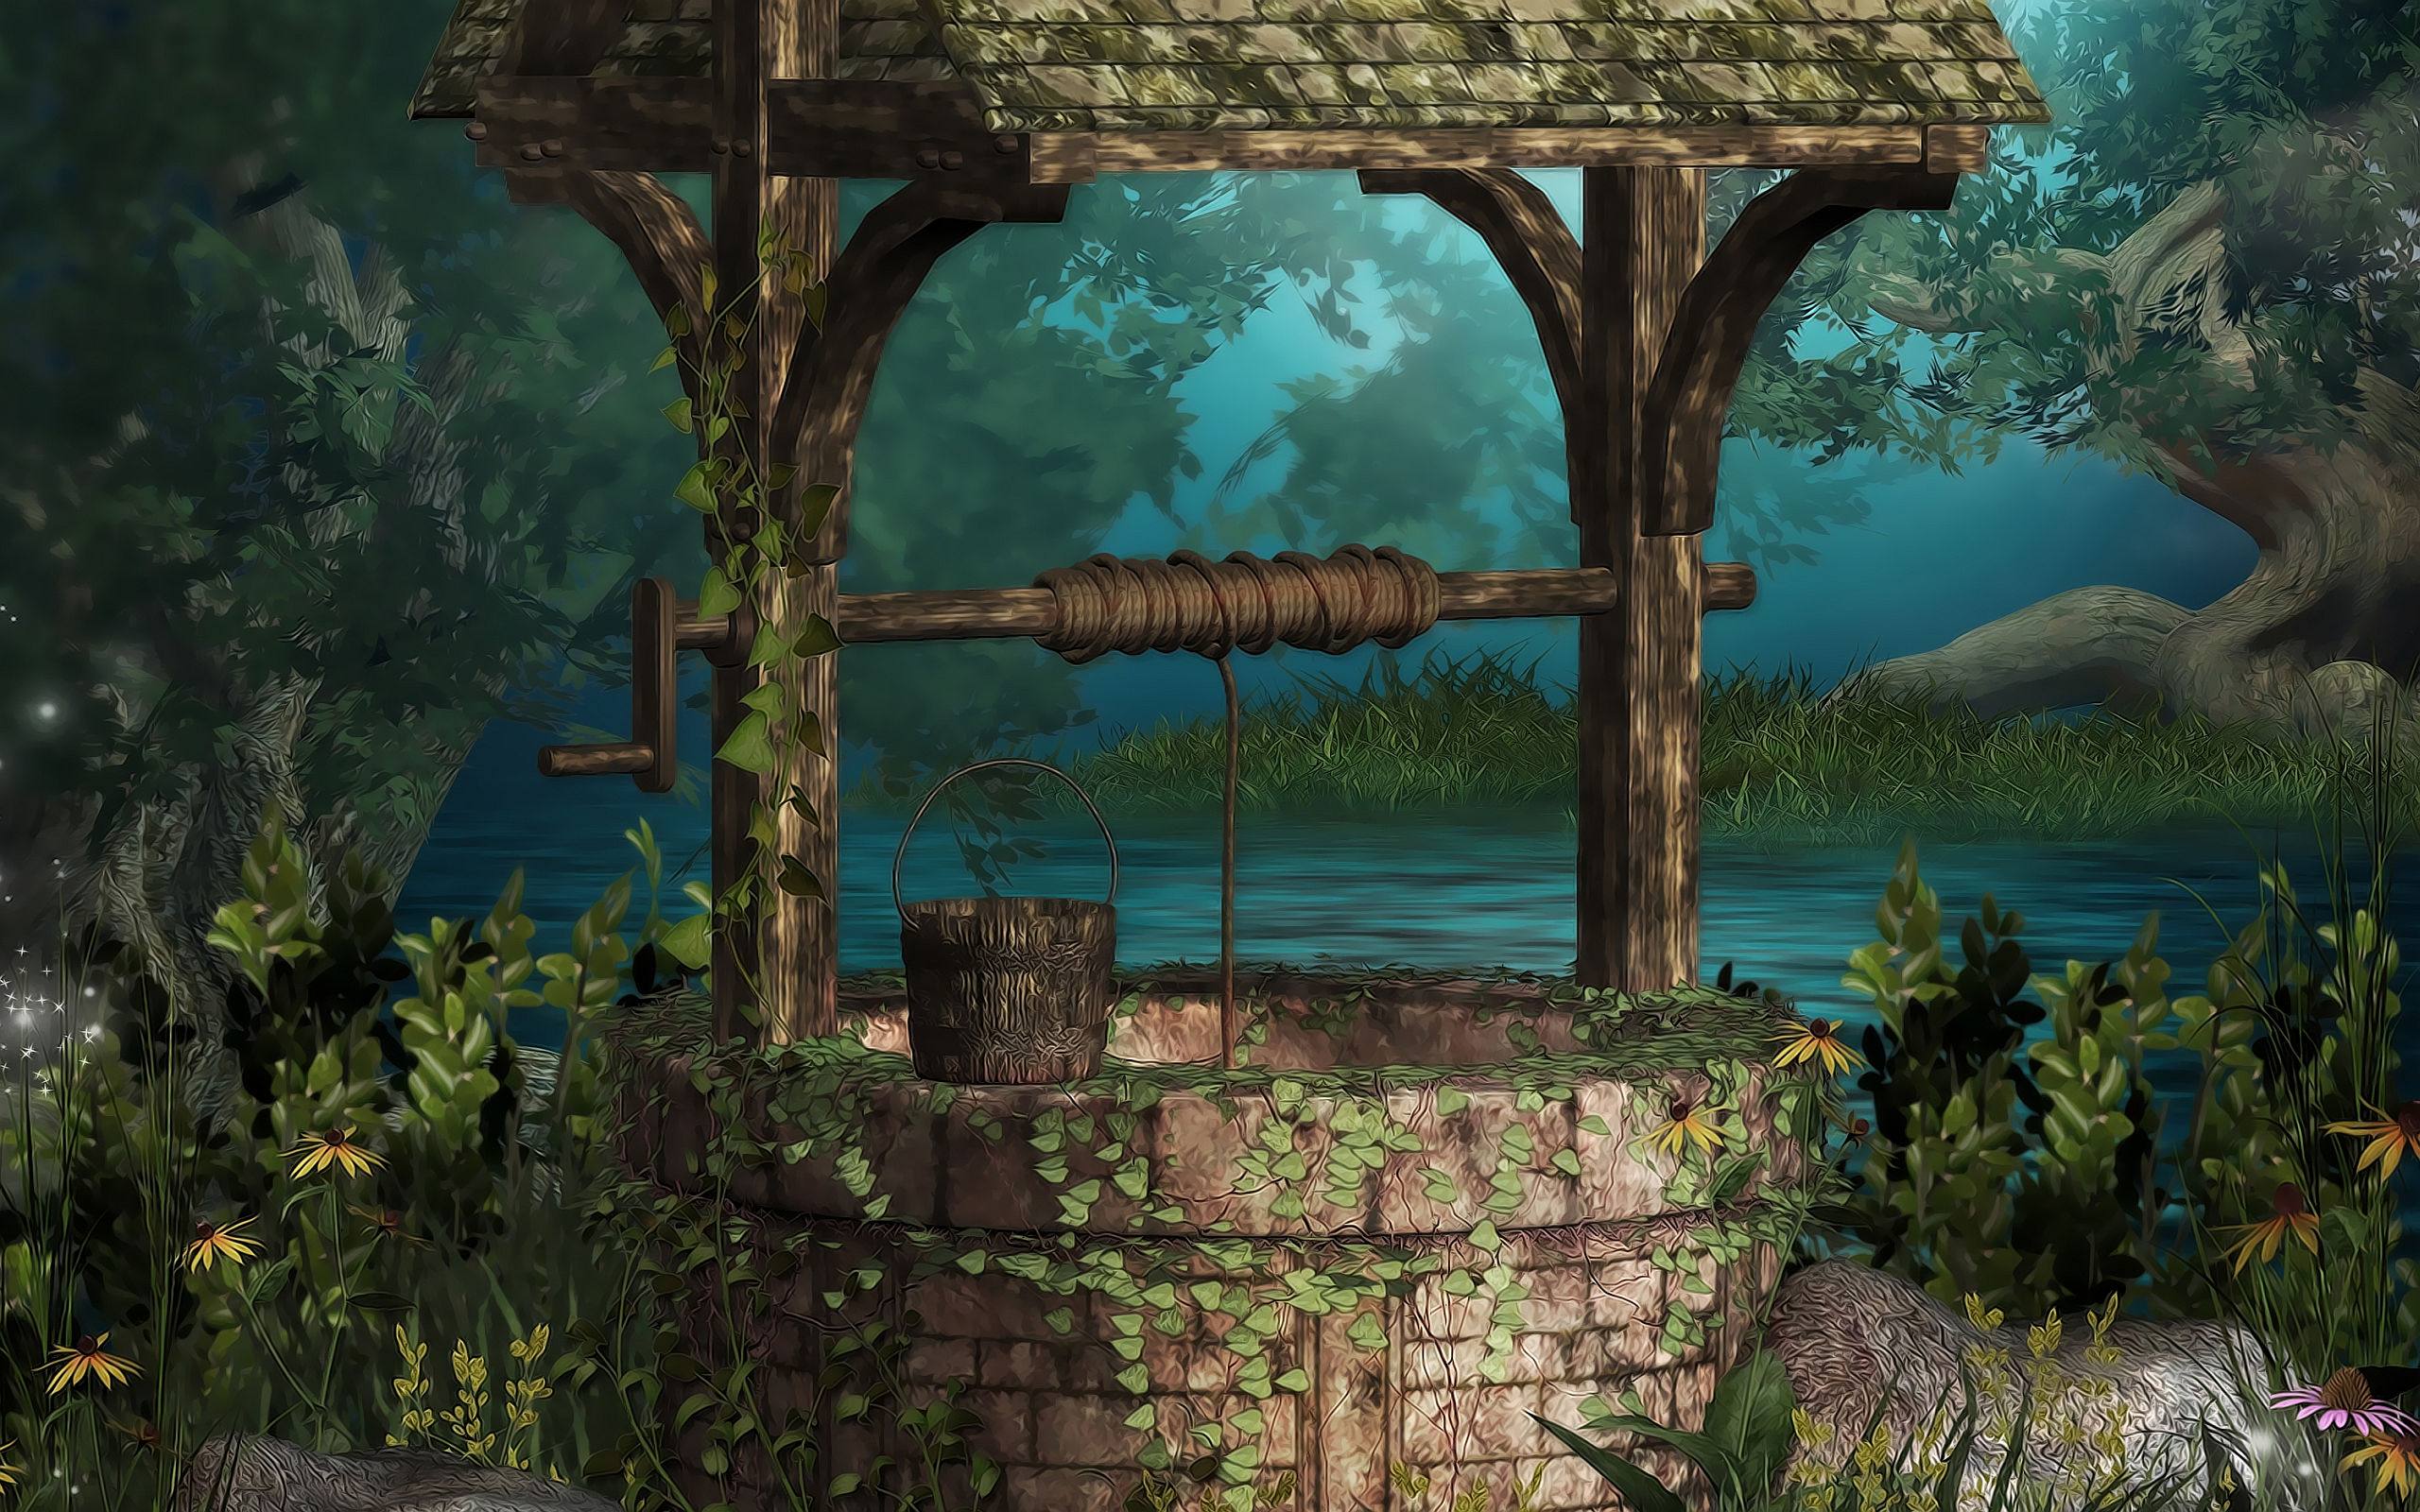 Fantasy artistic wallpaper with a well in a dreamy landscape